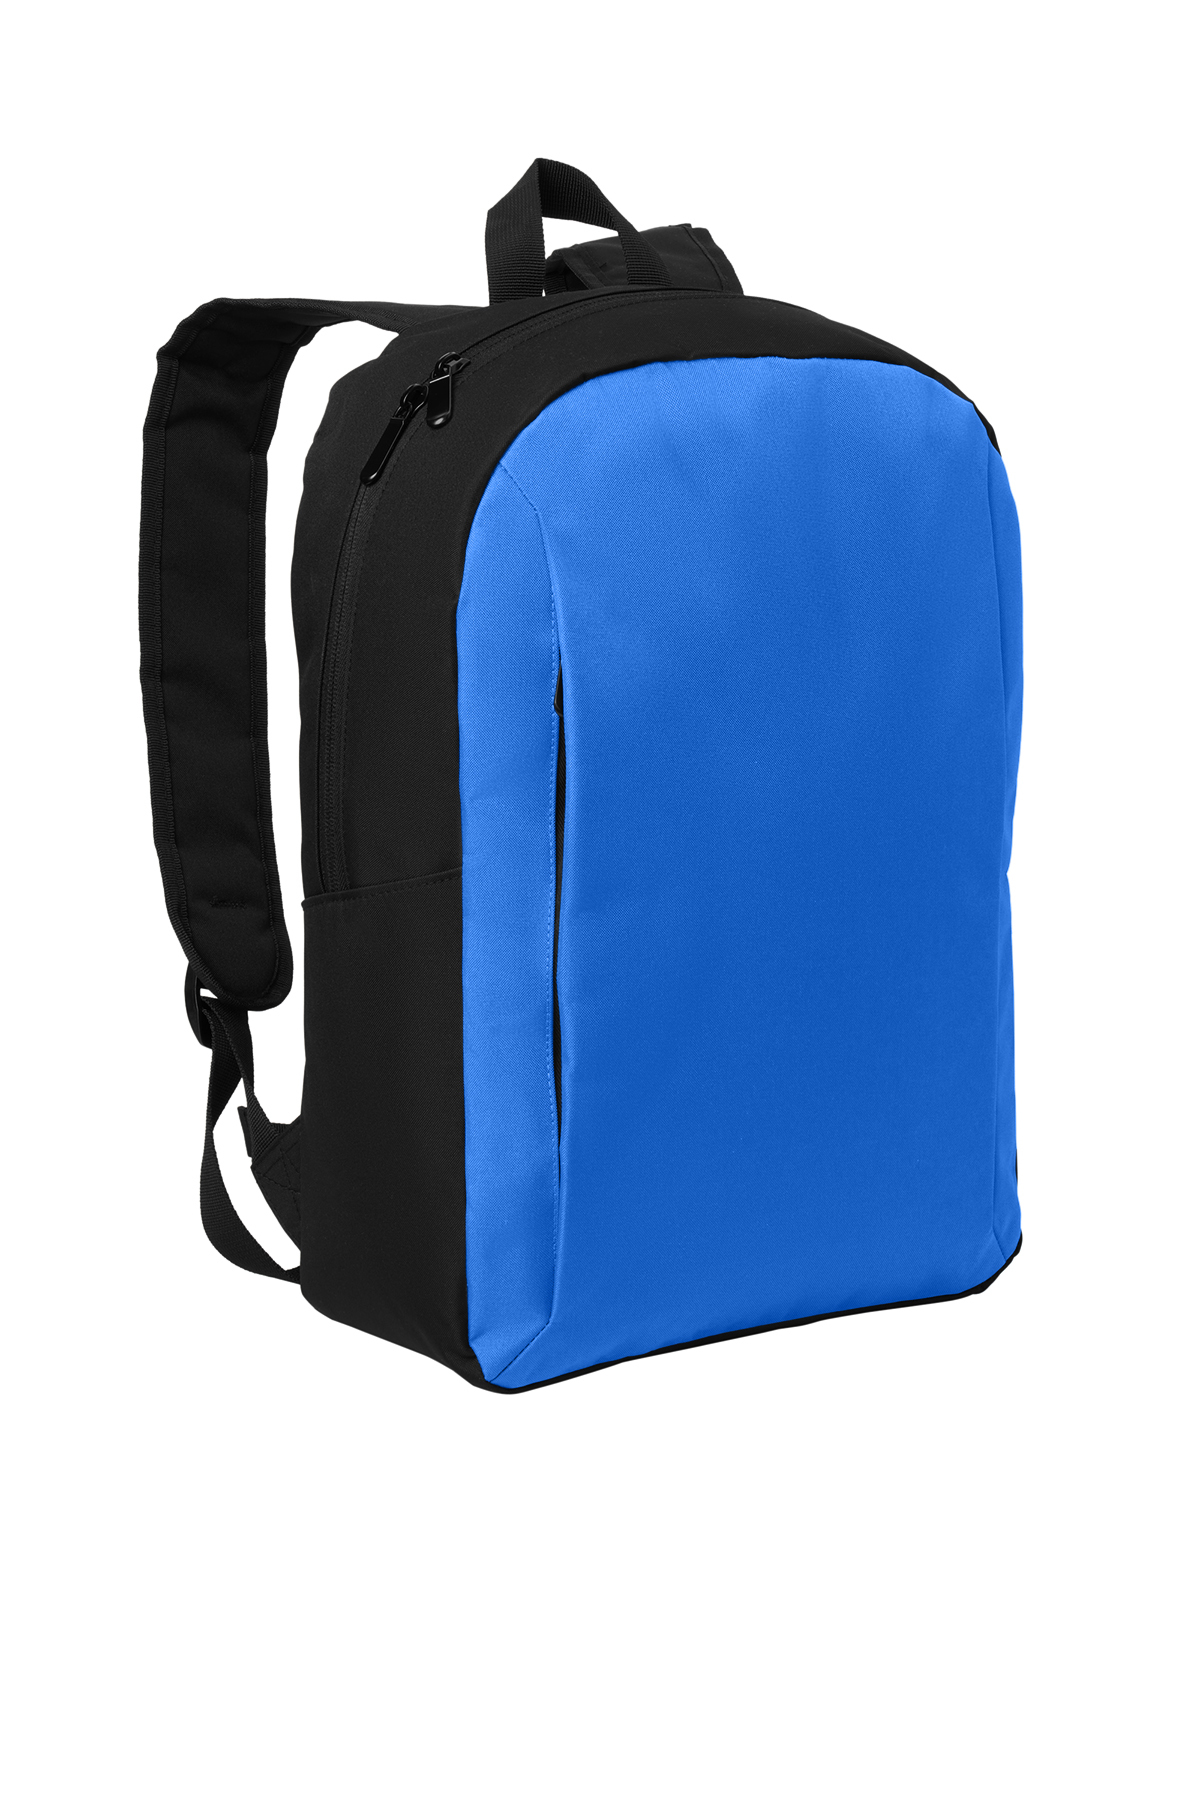 Port Authority Modern Backpack | Product | SanMar